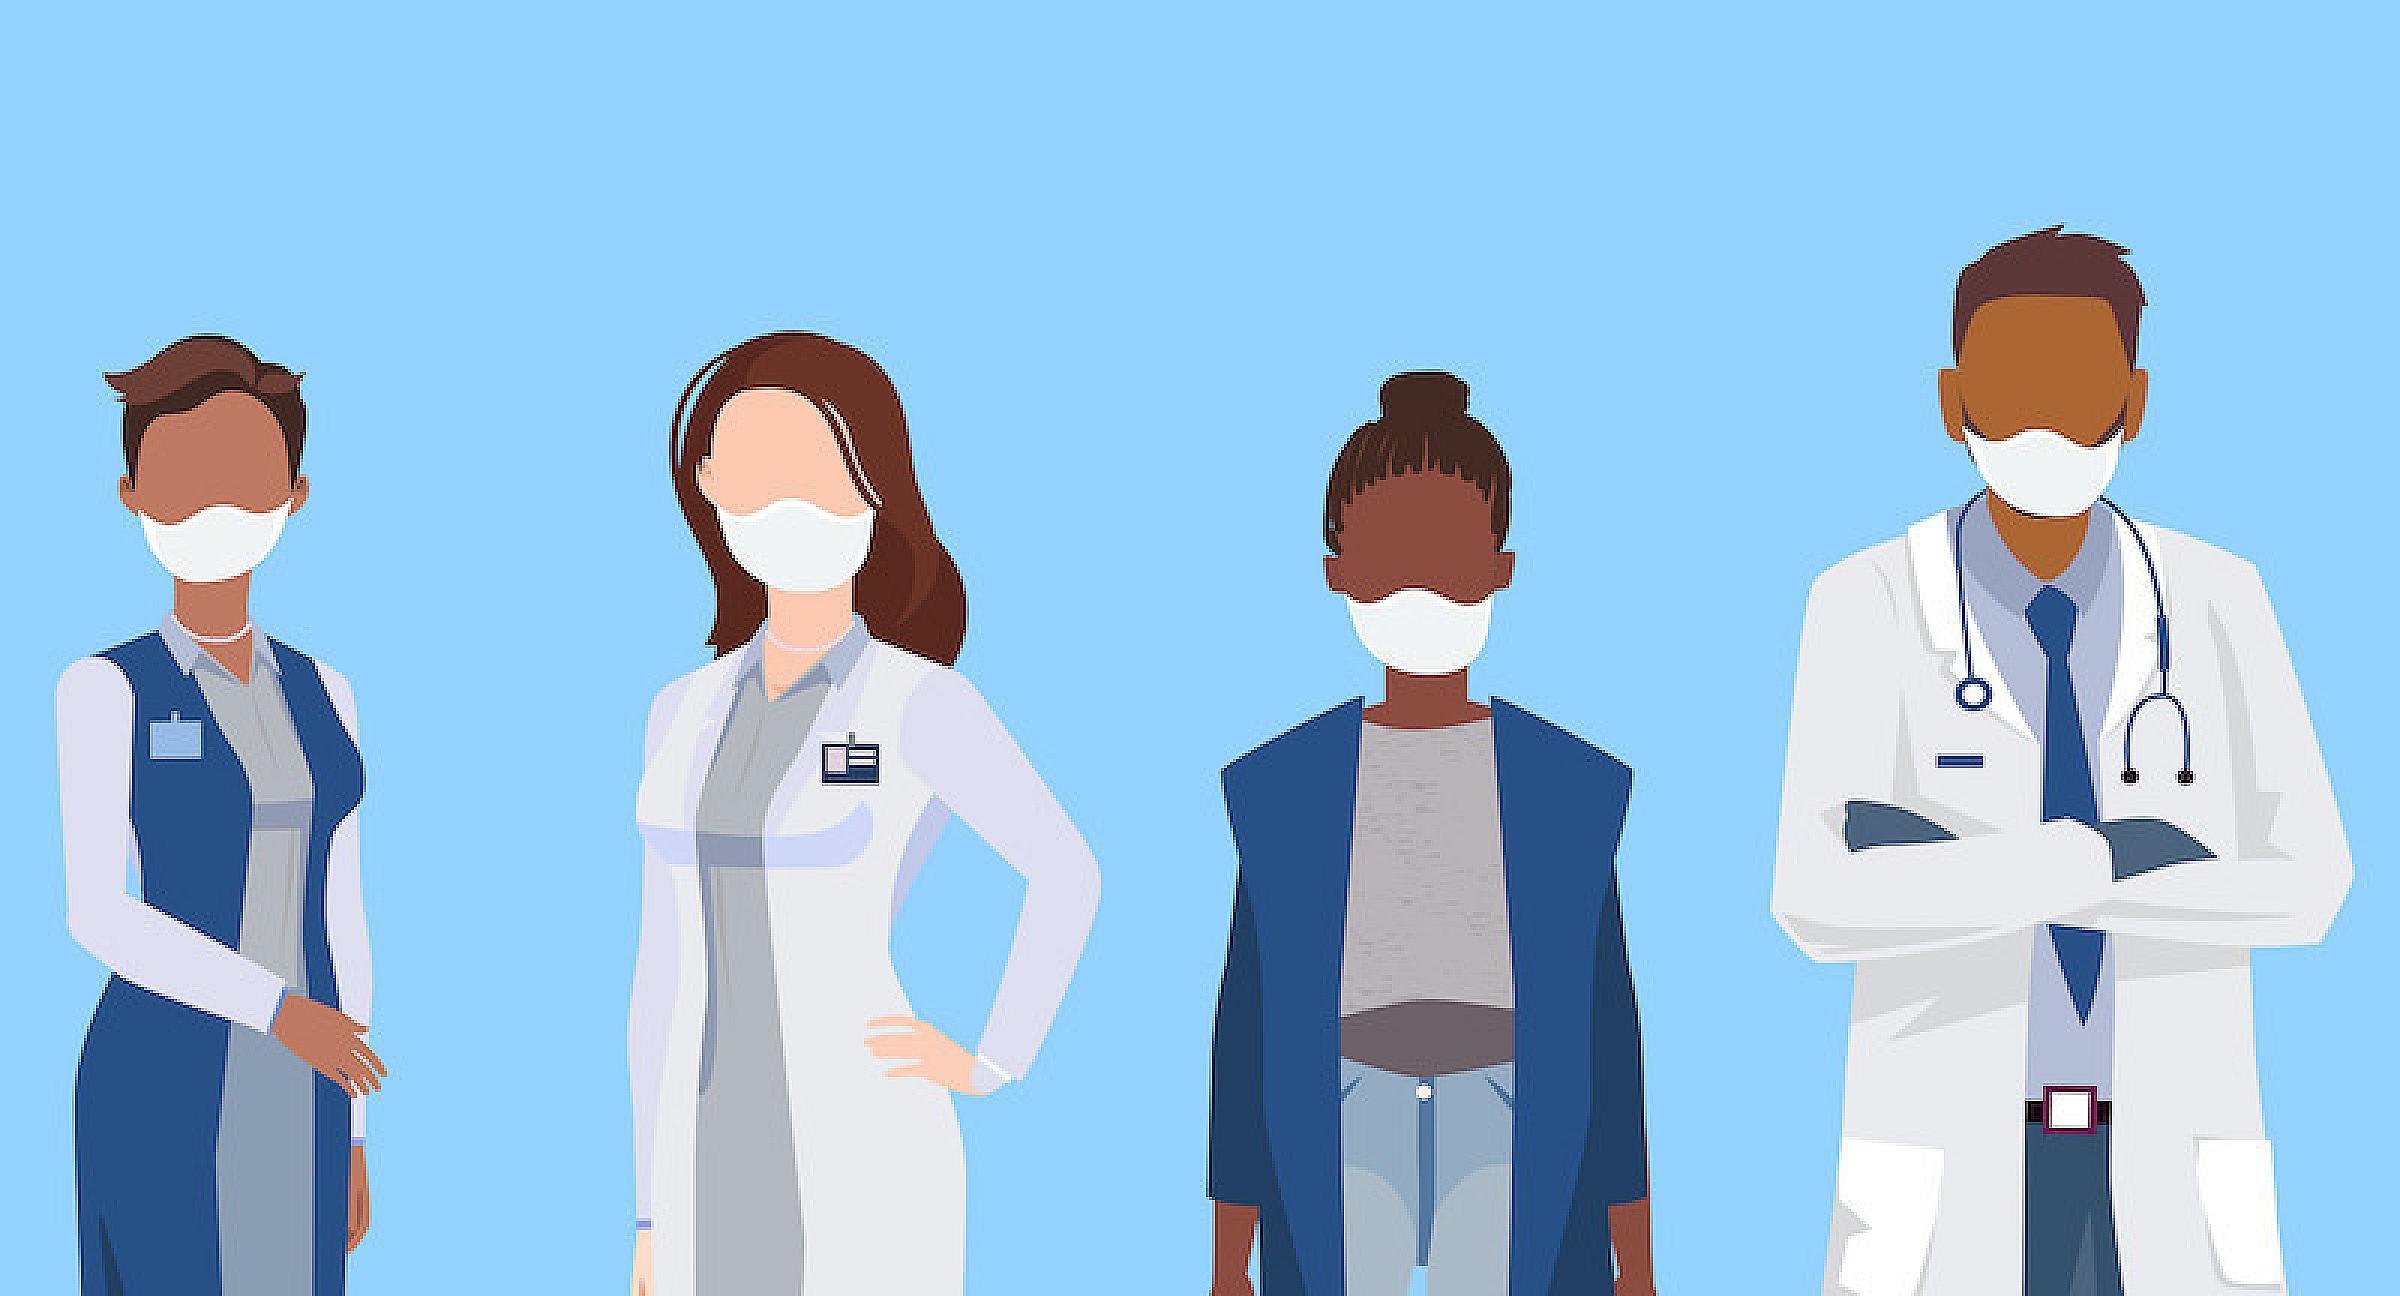 Doctors and nurses standing side by side graphic